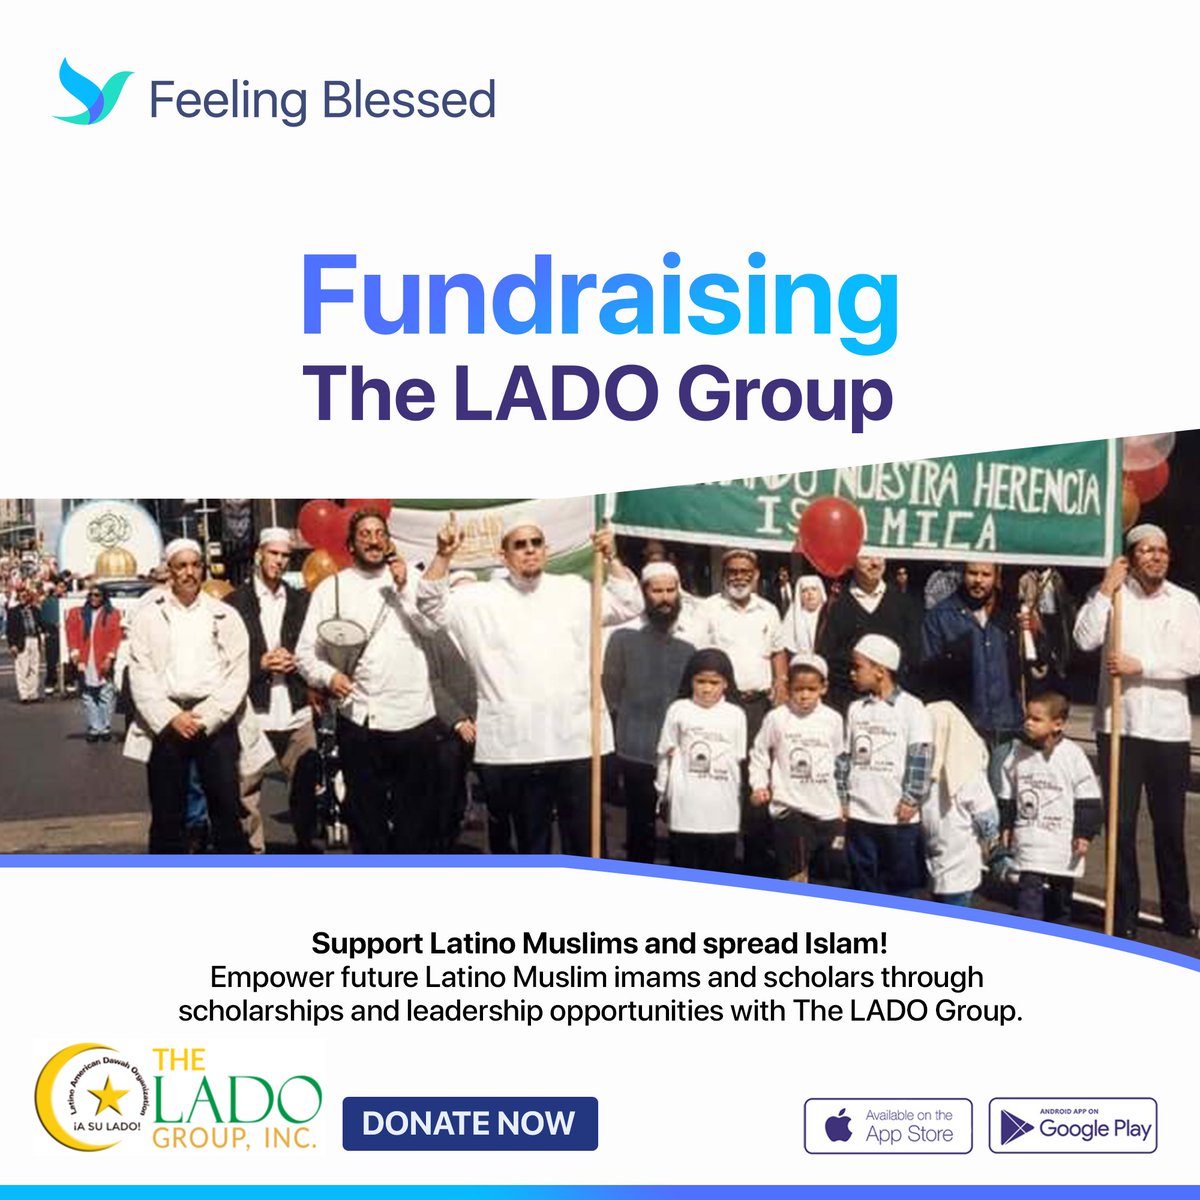 Join us in supporting Latino Muslims and spreading Islam with 𝗧𝗵𝗲 𝗟𝗔𝗗𝗢 𝗚𝗿𝗼𝘂𝗽!

Be a part of this transformative journey and help us create a brighter future for our Latino Muslims.

Donate now: rb.gy/p9j5m

#FundraisingForACause #TheLADOGroup